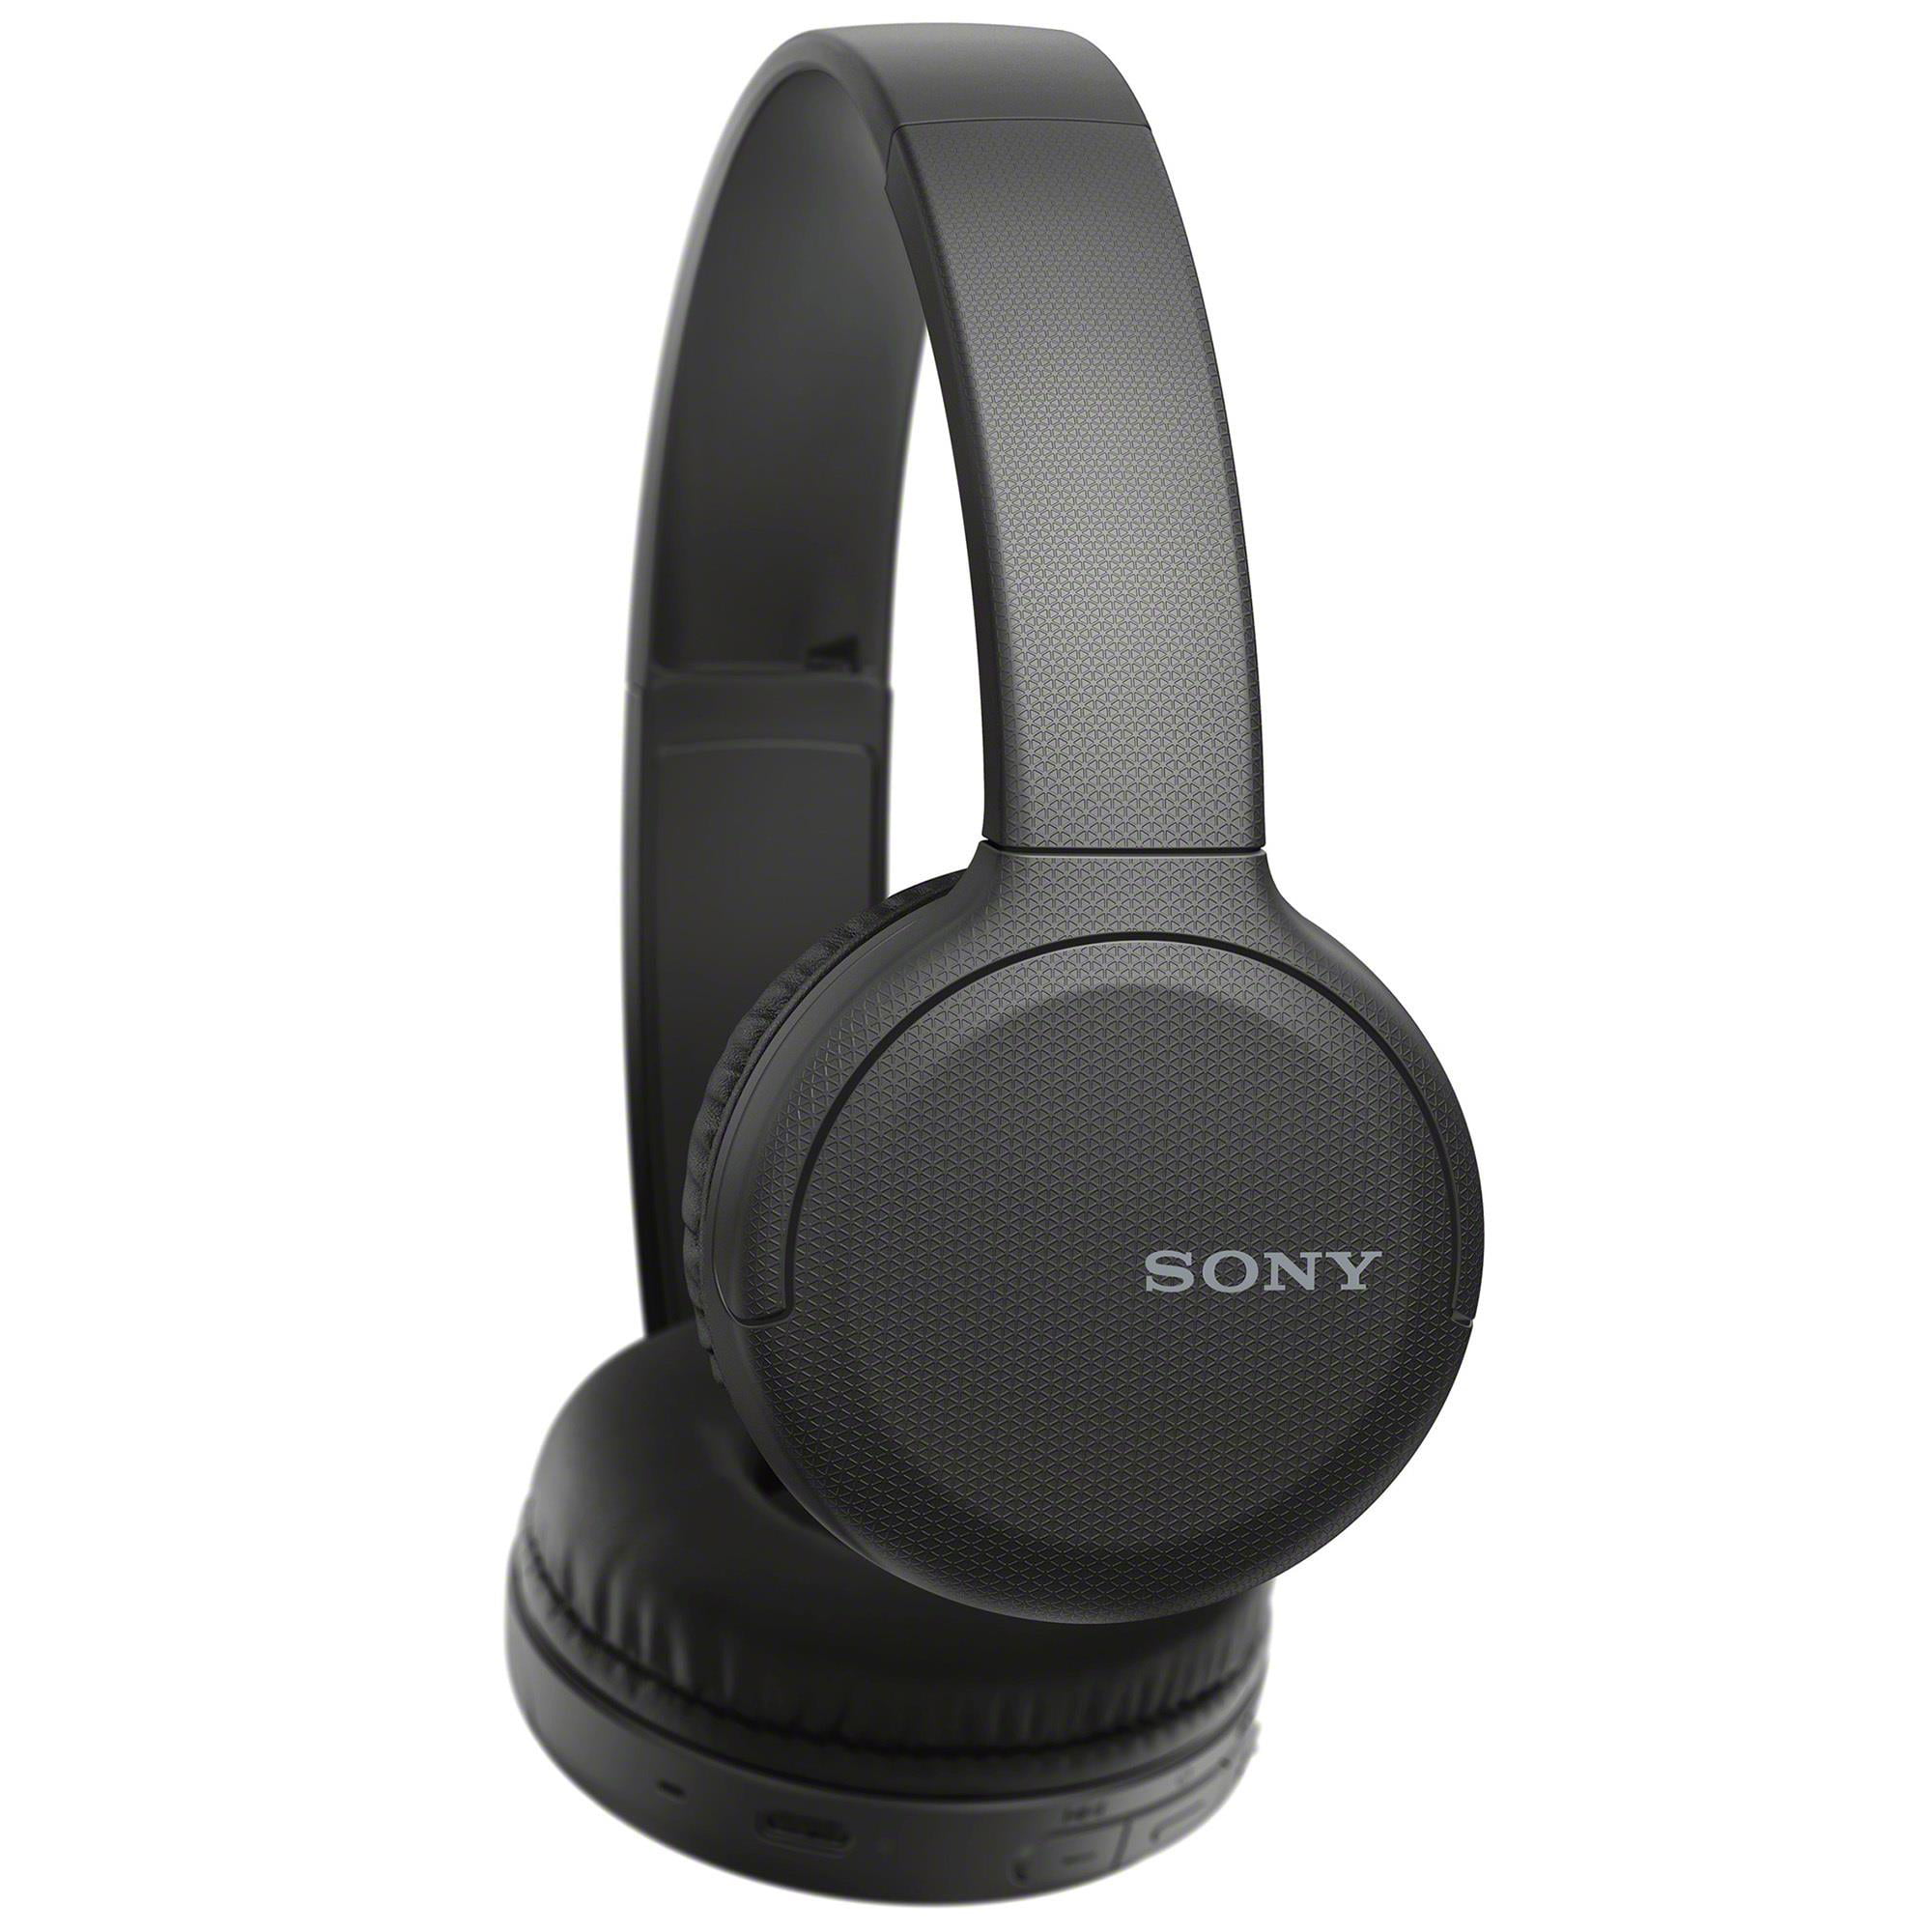 Sony WH-CH510 Wireless On-Ear Headphones (Black) with Hardshell